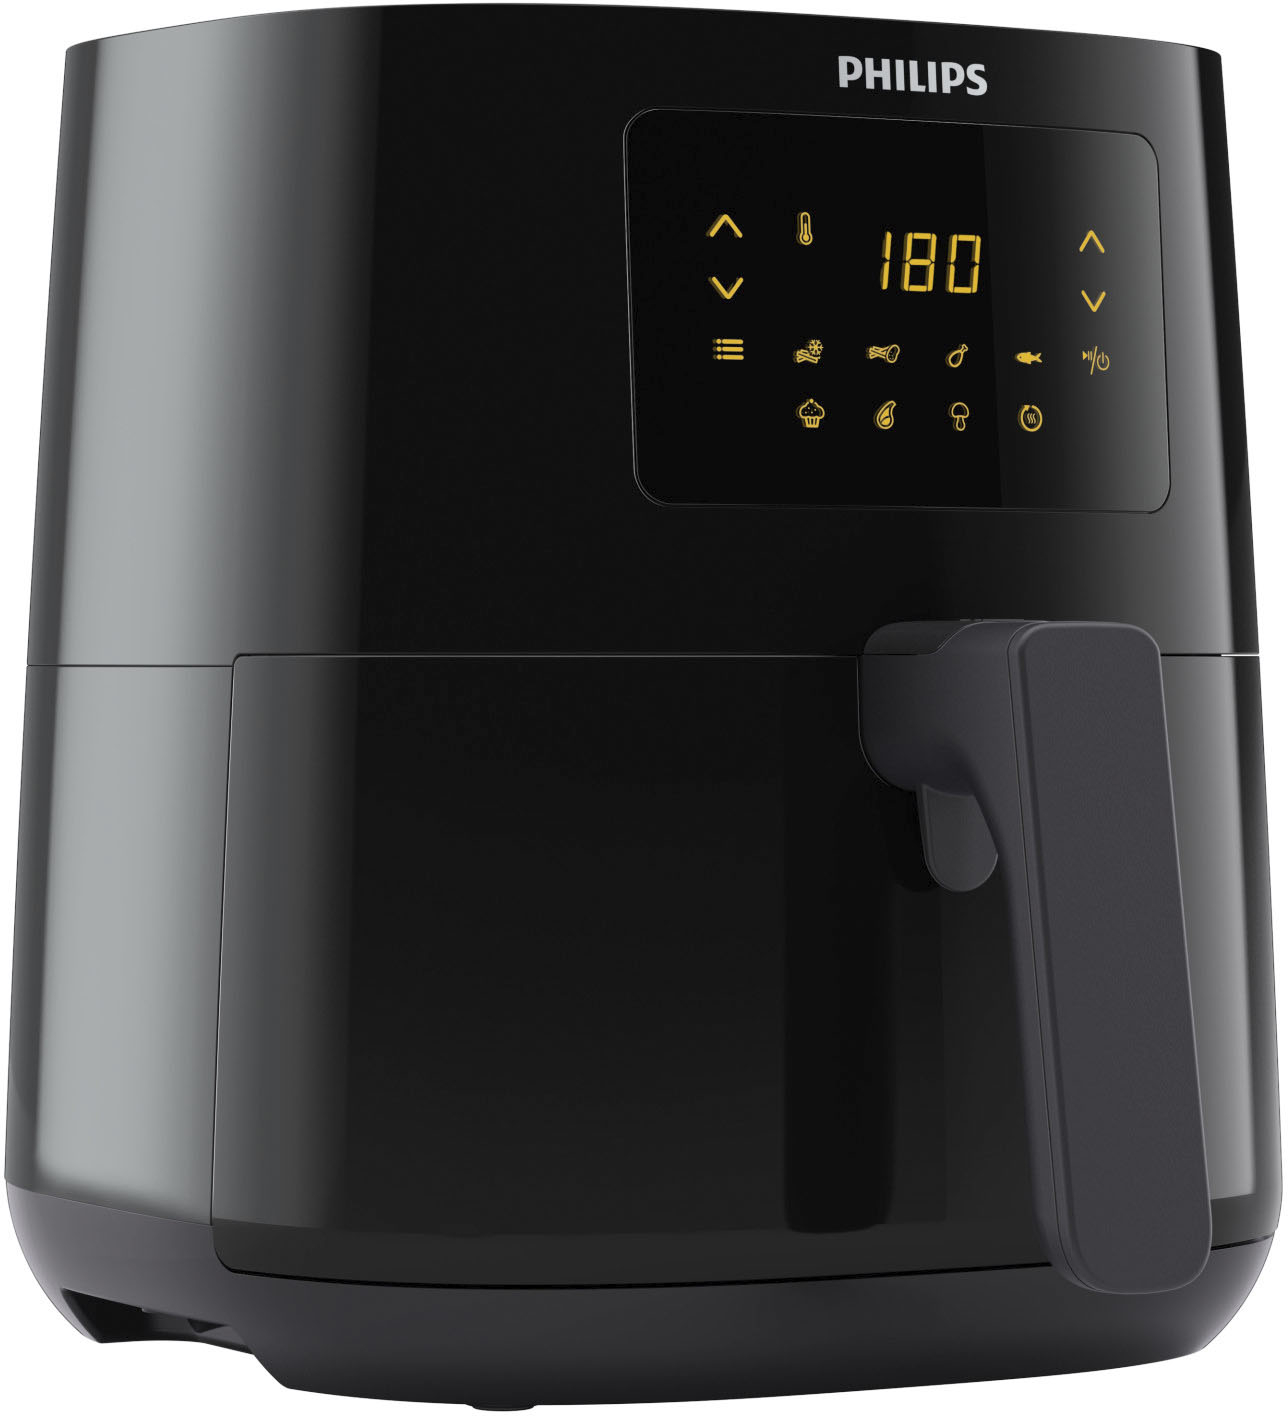  PHILIPS 3000 Series Air Fryer Essential Compact with Rapid Air  Technology, 13-in-1 Cooking Functions to Fry, Bake, Grill, Roast & Reheat  with up to 90% Less Fat*, 4.1L capacity, Black (HD9252/91) 